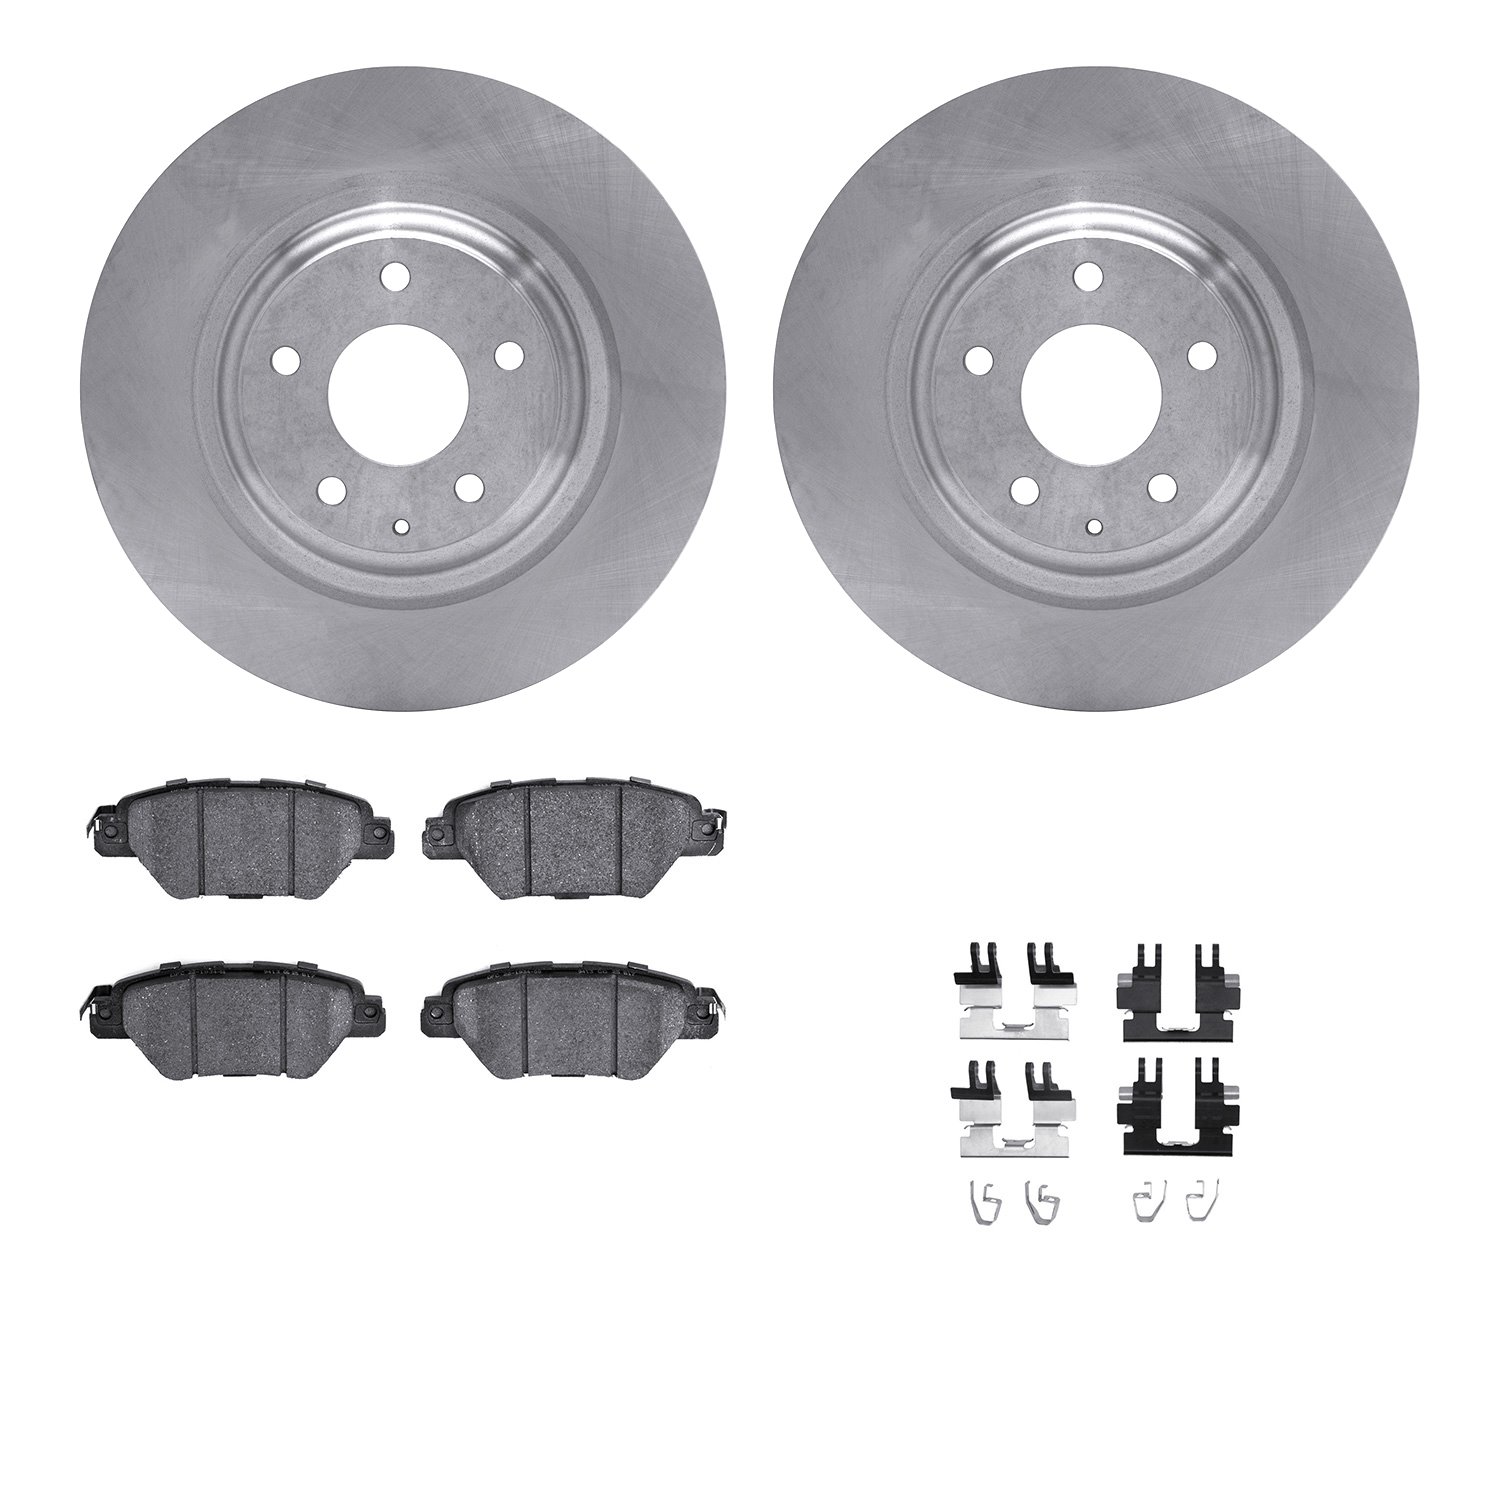 6312-80087 Brake Rotors with 3000-Series Ceramic Brake Pads Kit with Hardware, Fits Select Ford/Lincoln/Mercury/Mazda, Position: